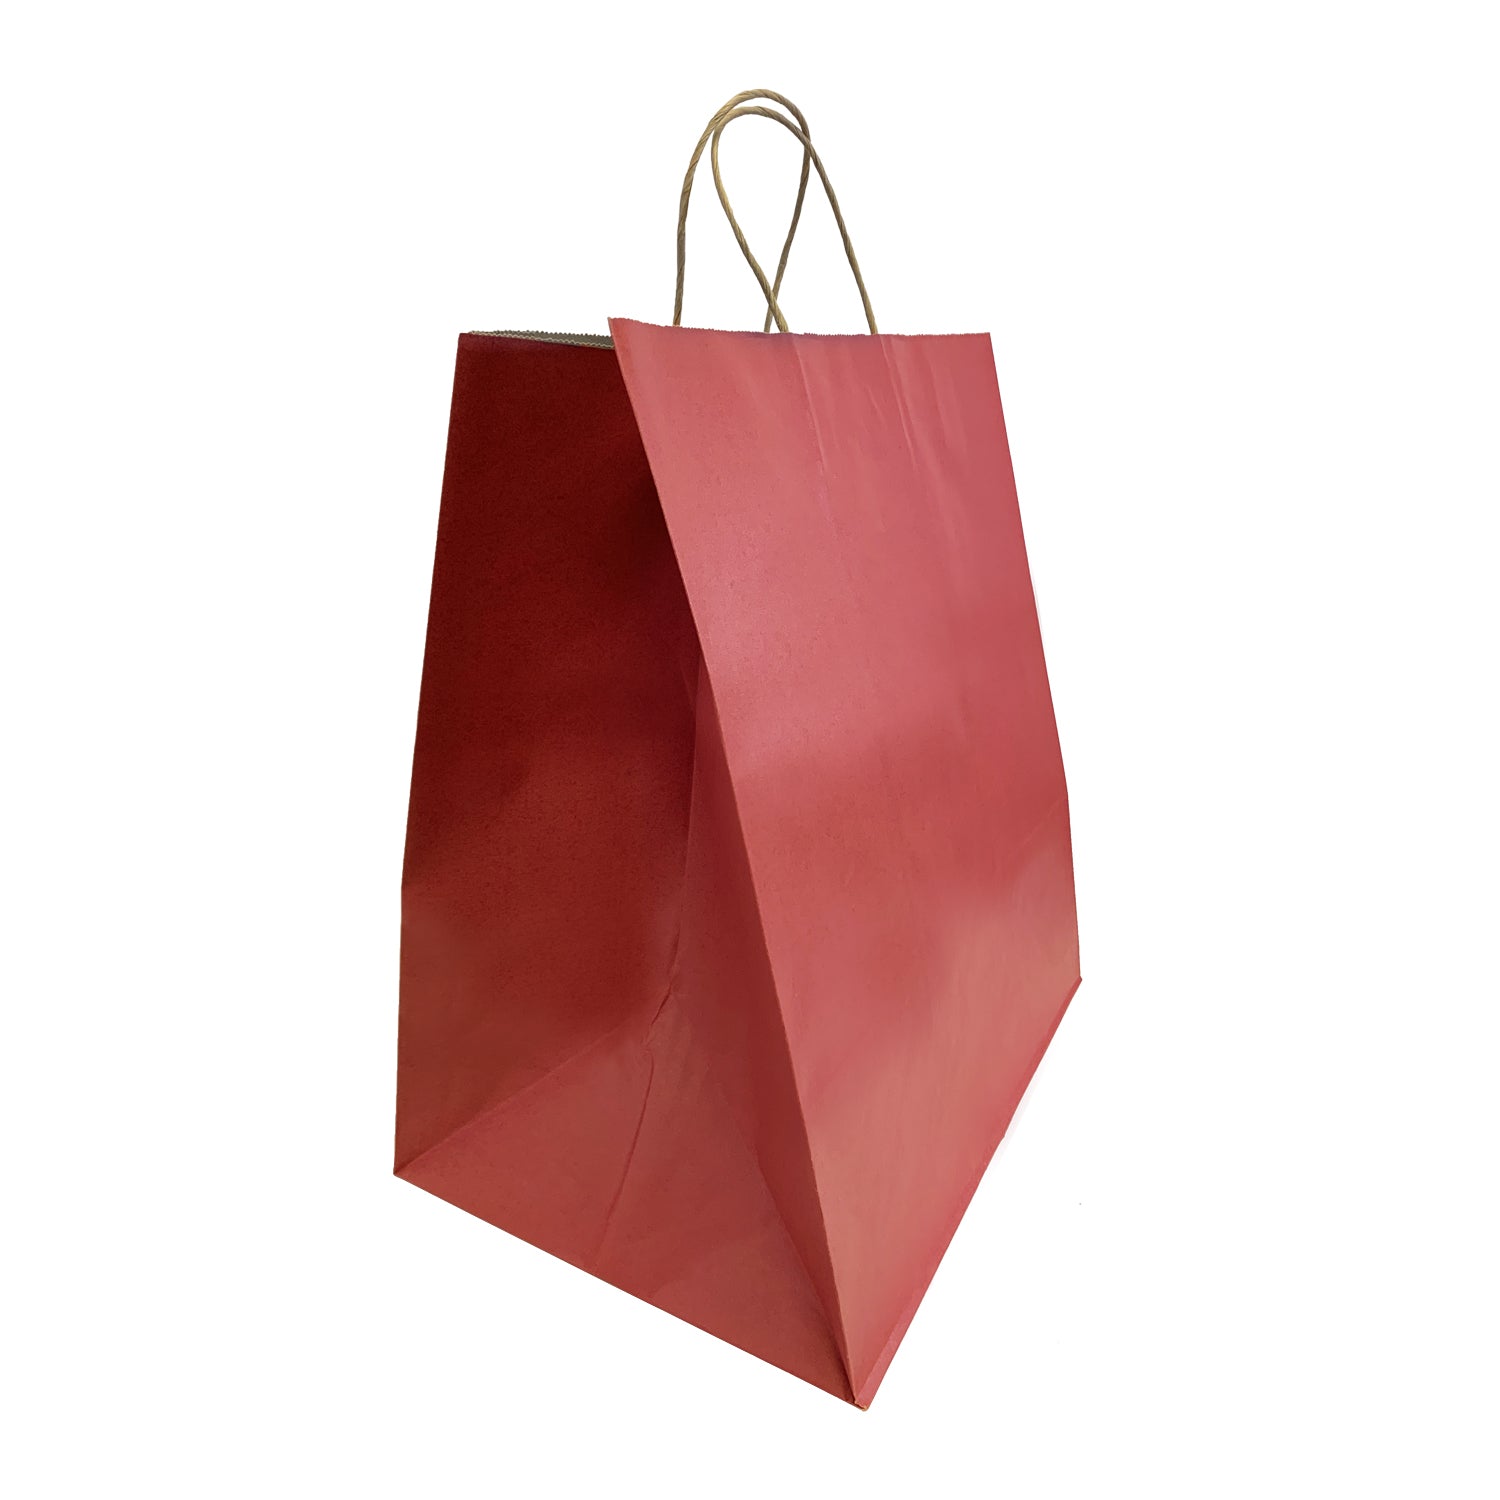 150 Pcs, Super Royal, 14x10x15.75 inches, Burgundy Kraft Paper Bags, with Twisted Handle